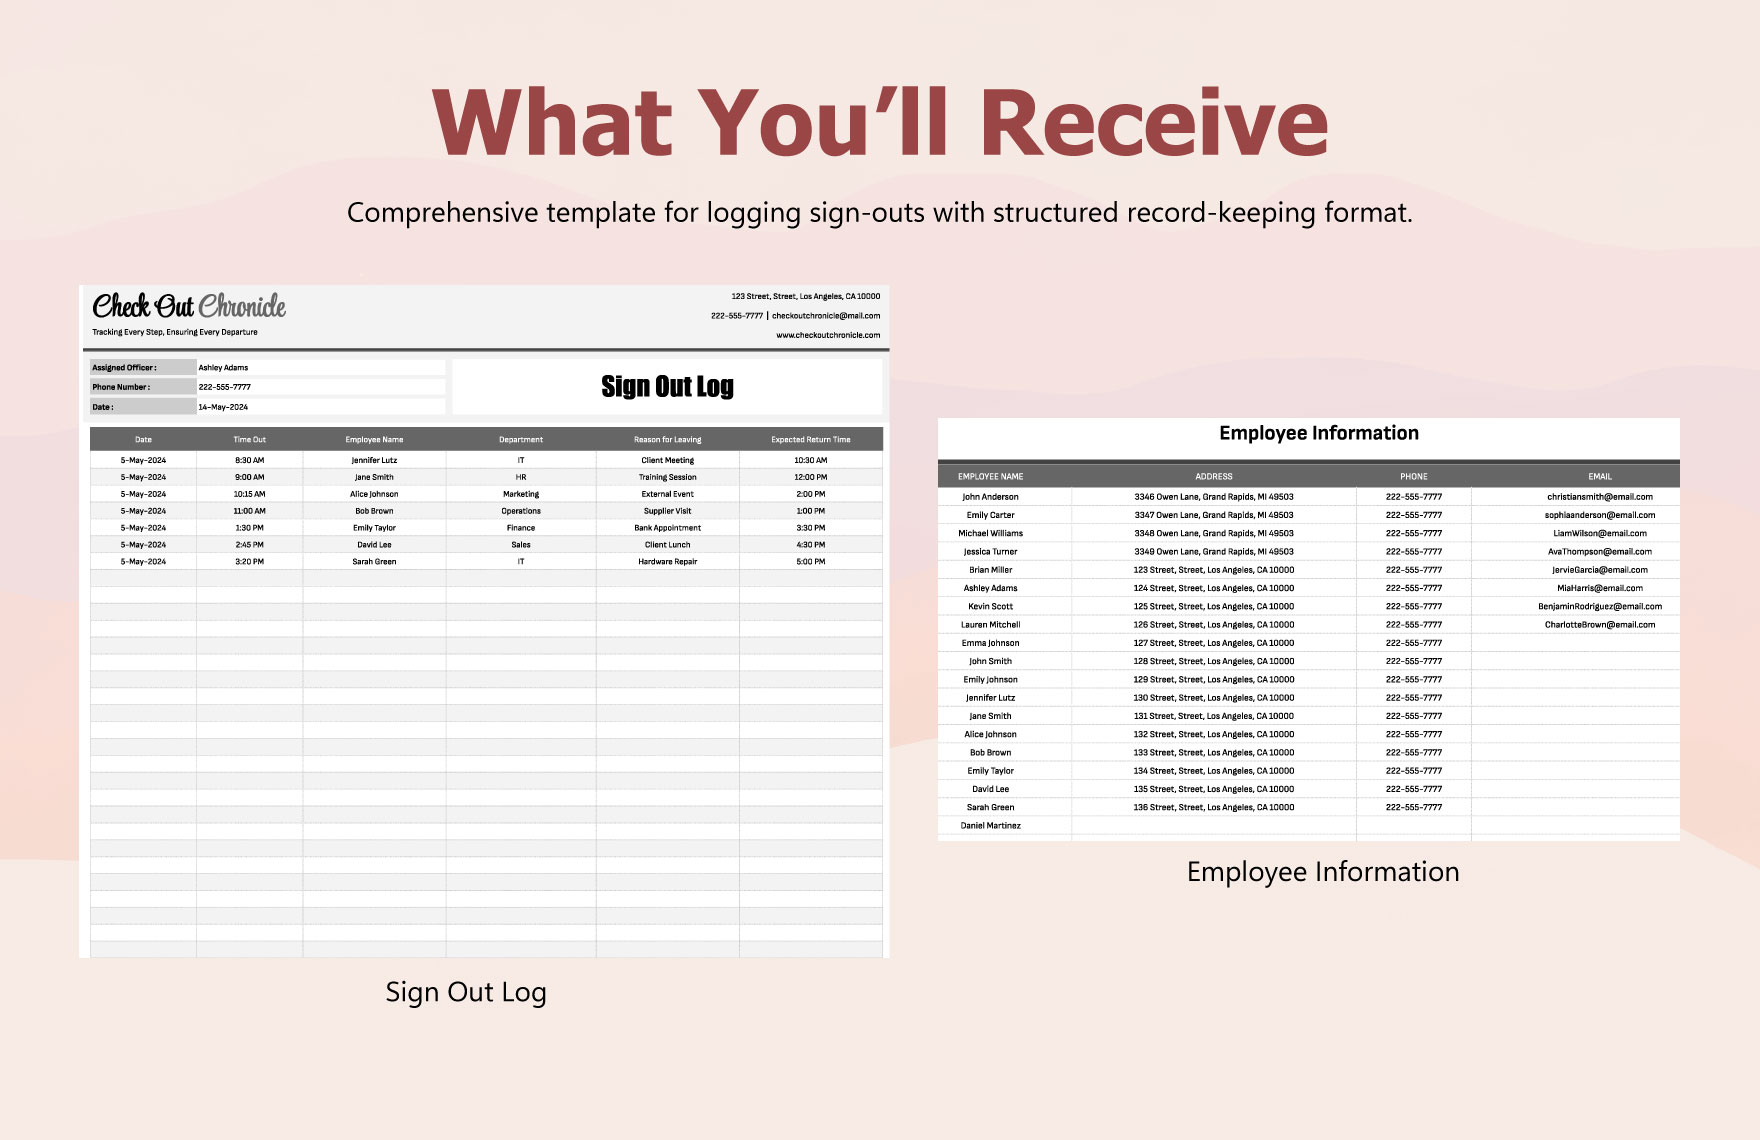 Sign Out Log Template